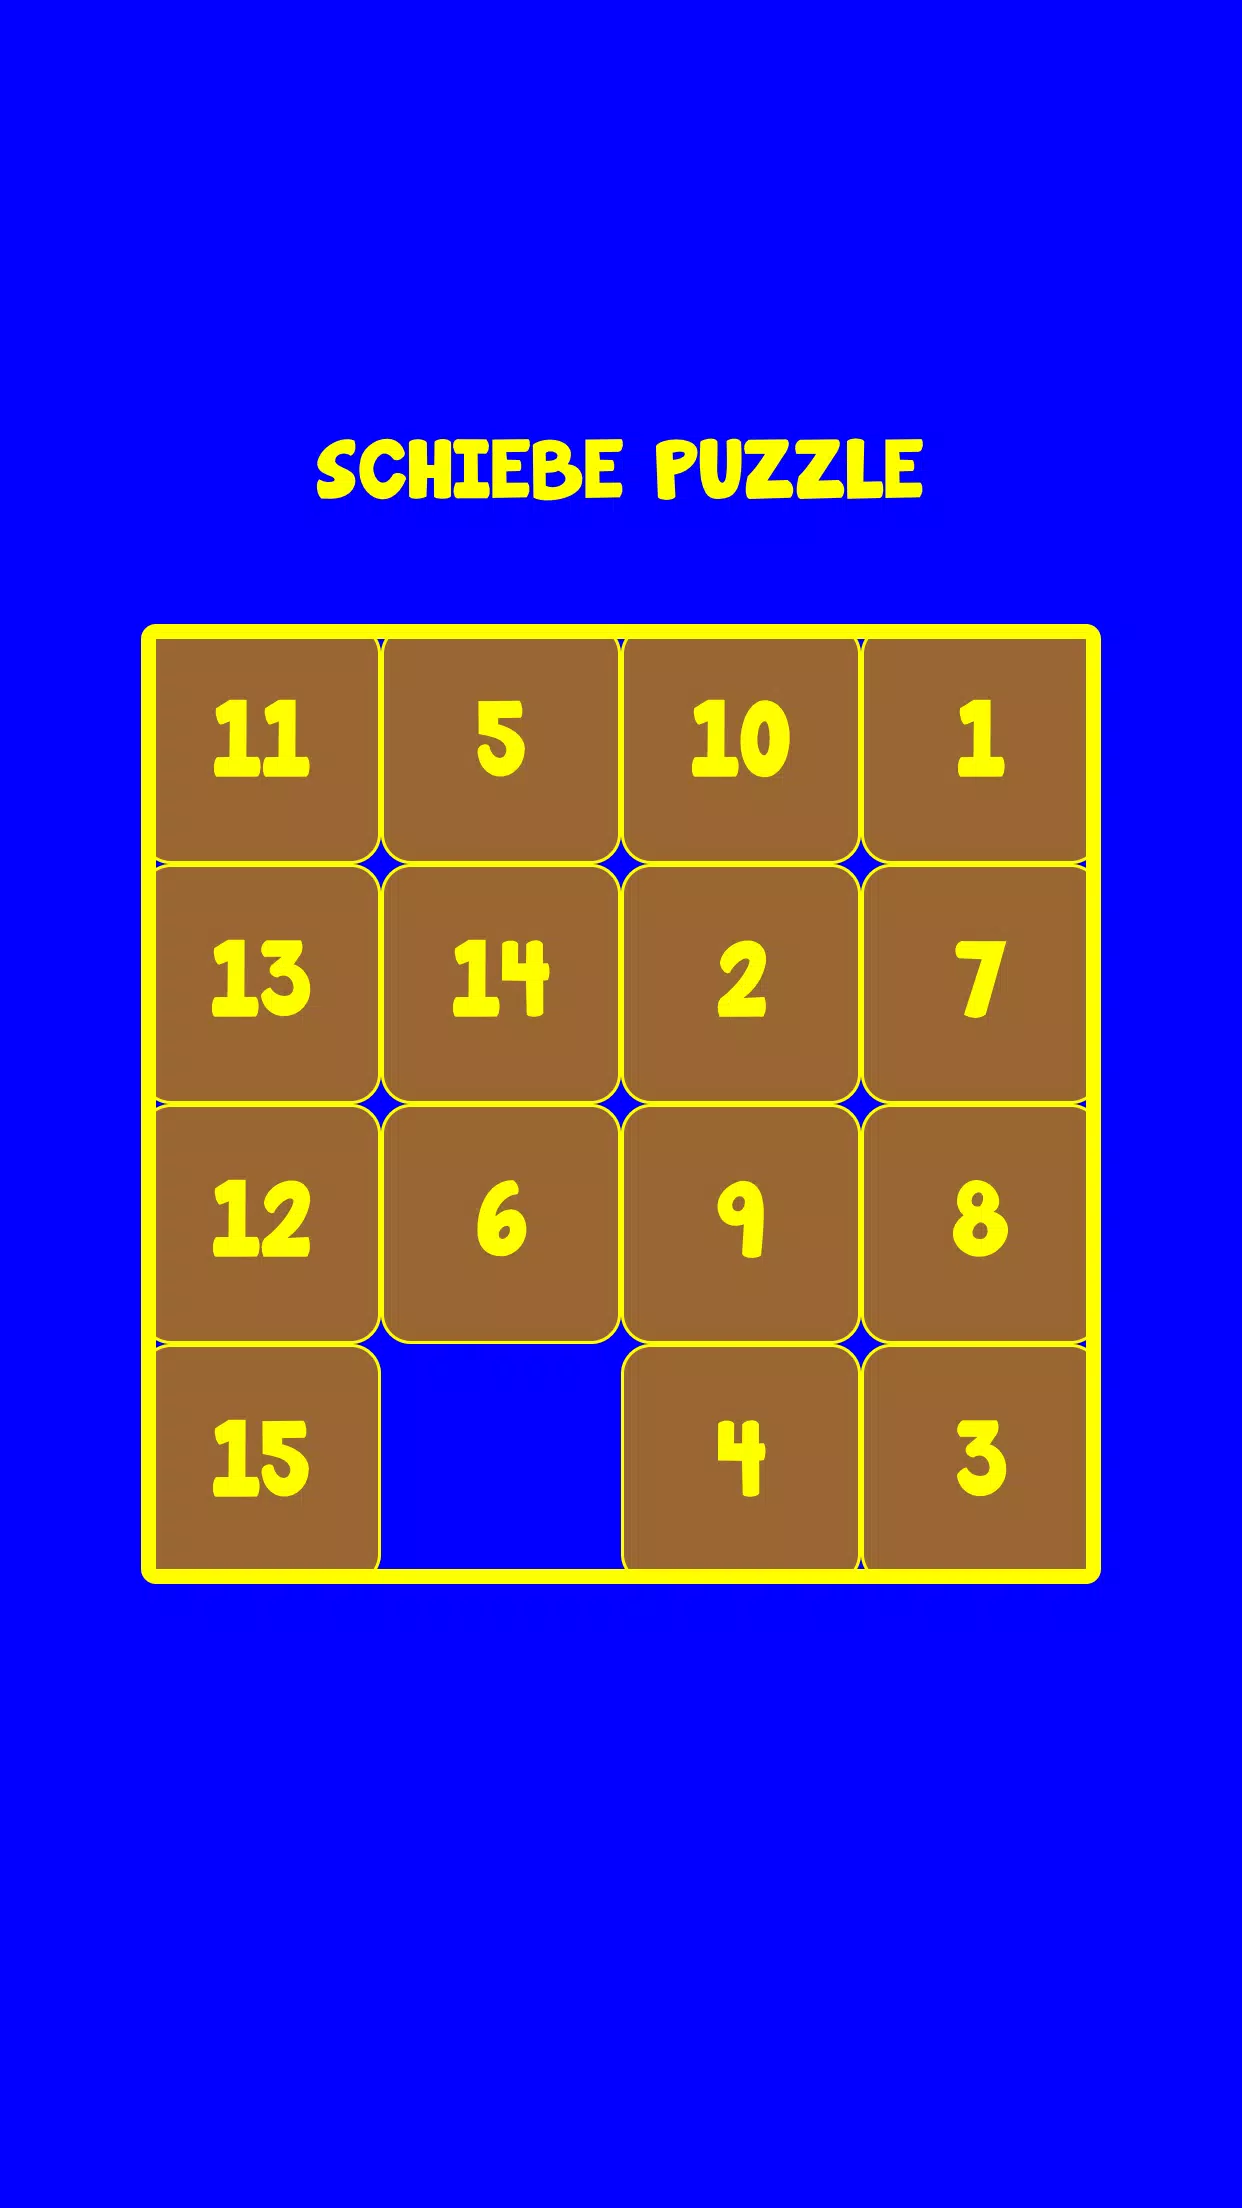 Schiebe Puzzle for Android - APK Download